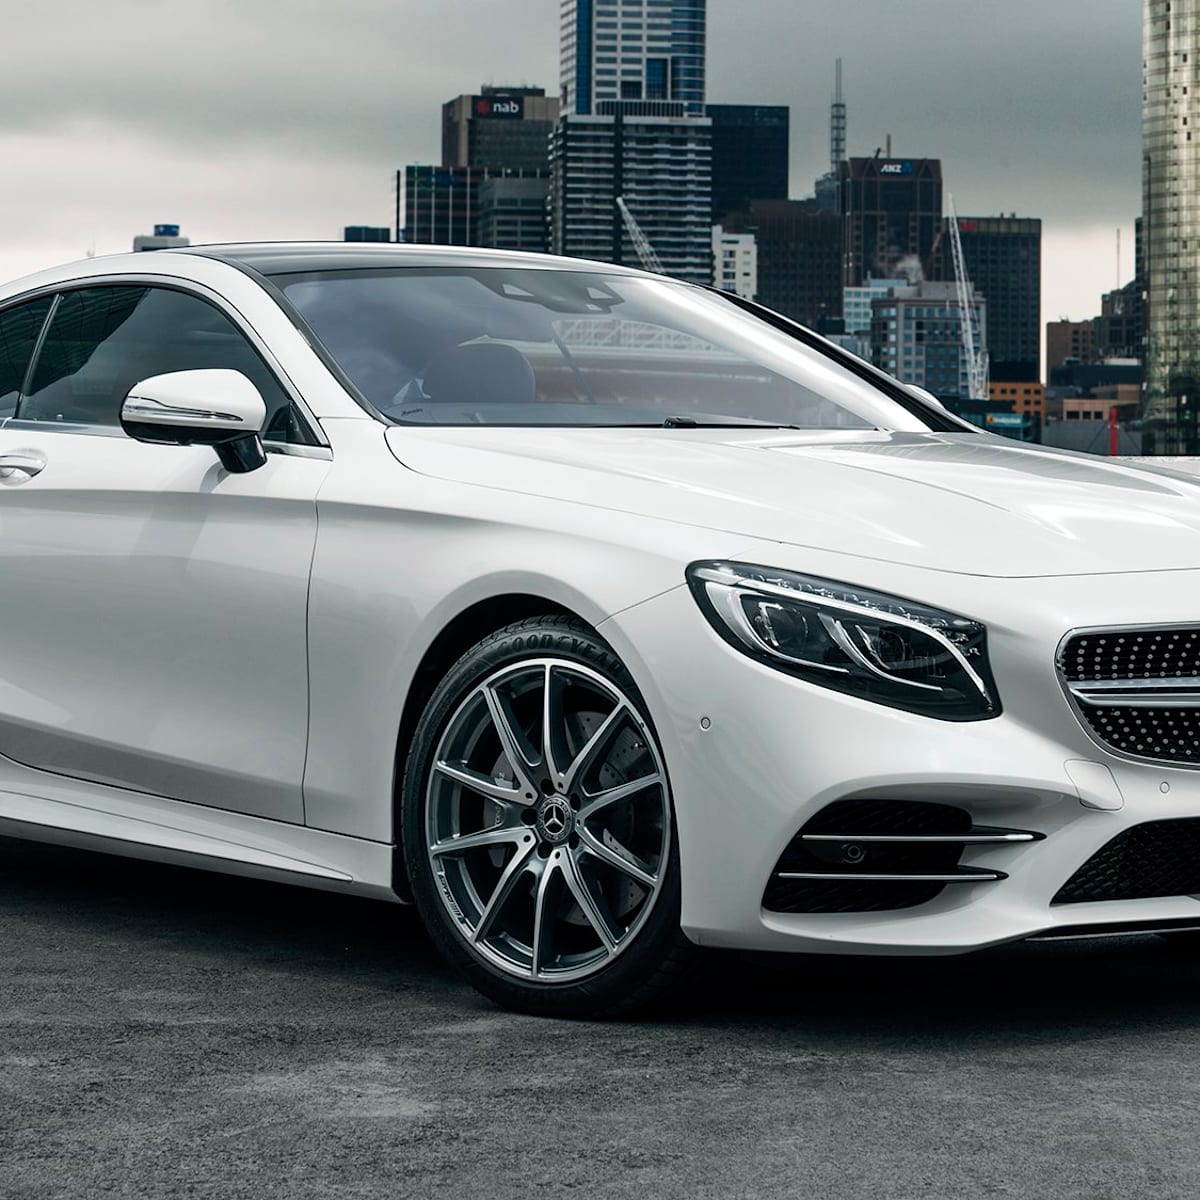 2019 Mercedes Benz S Class Coupe Convertible Pricing And